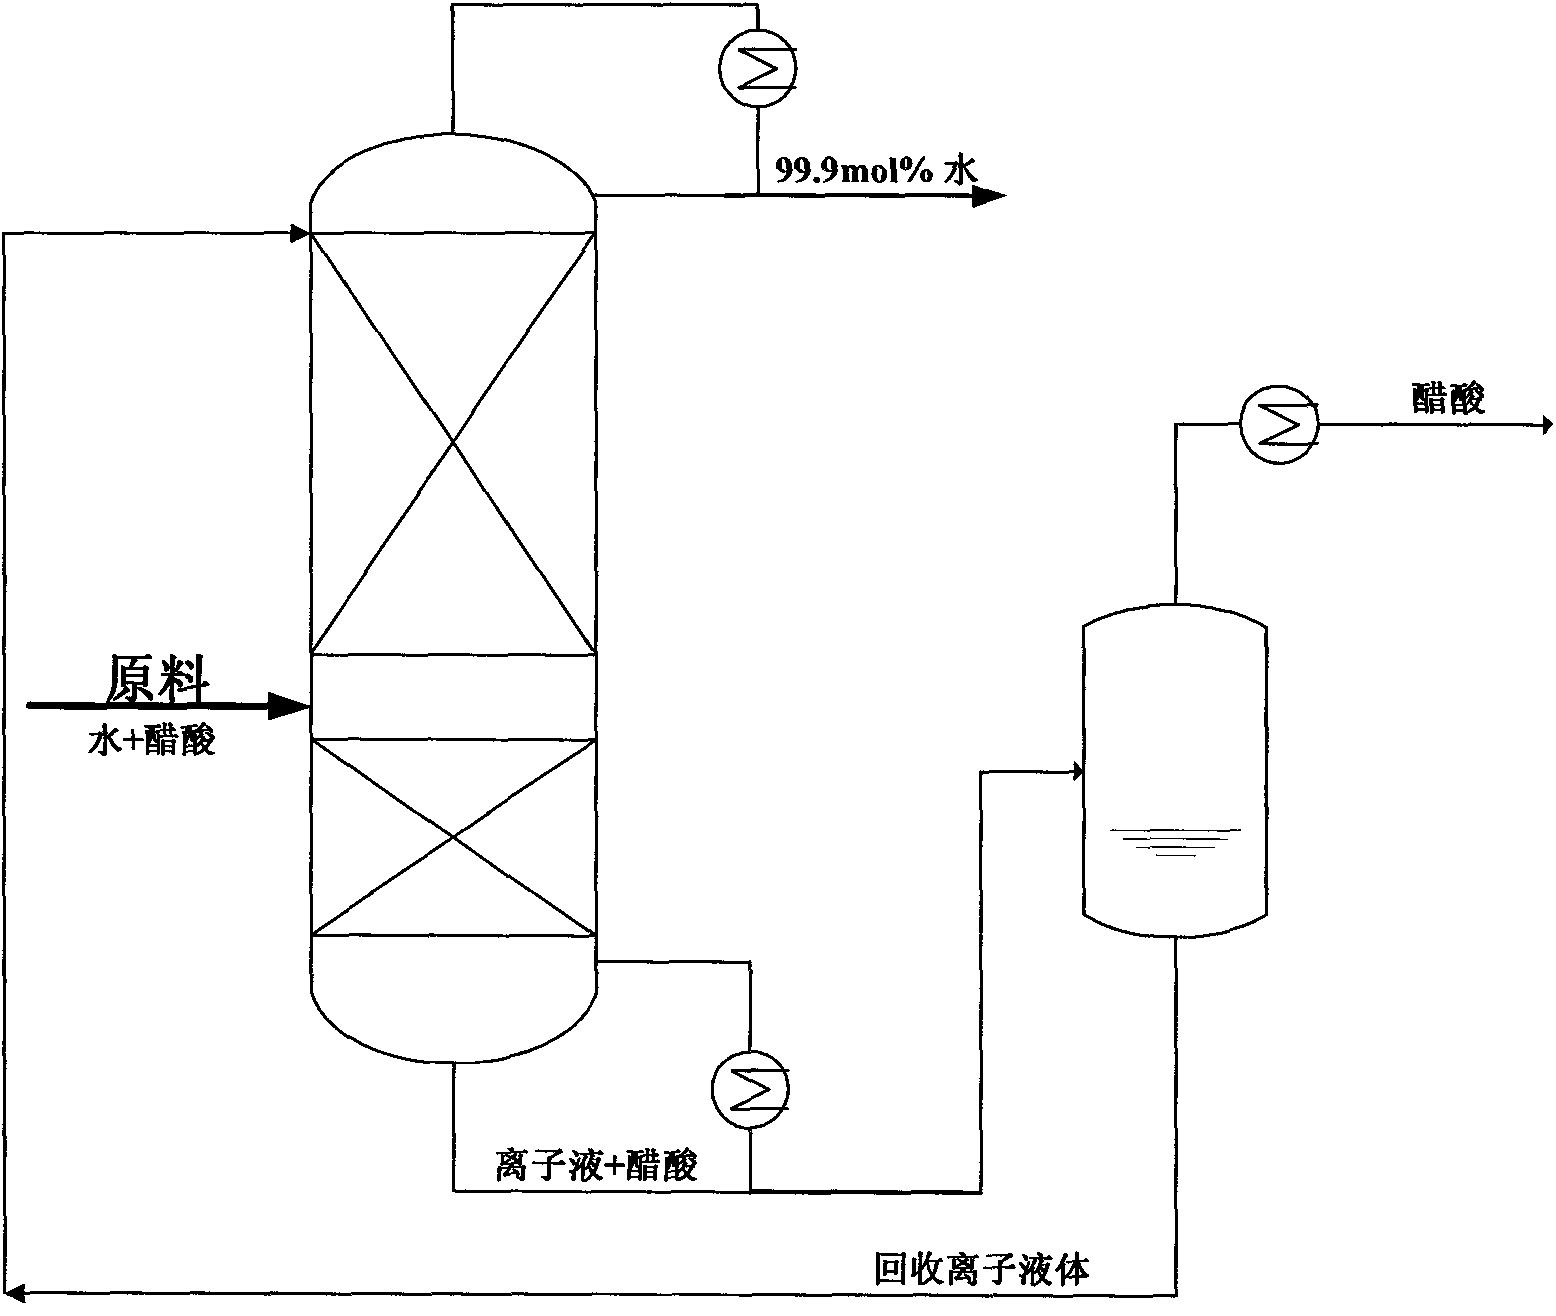 Ionic liquid extractive distillation method for separating acetic acid and water